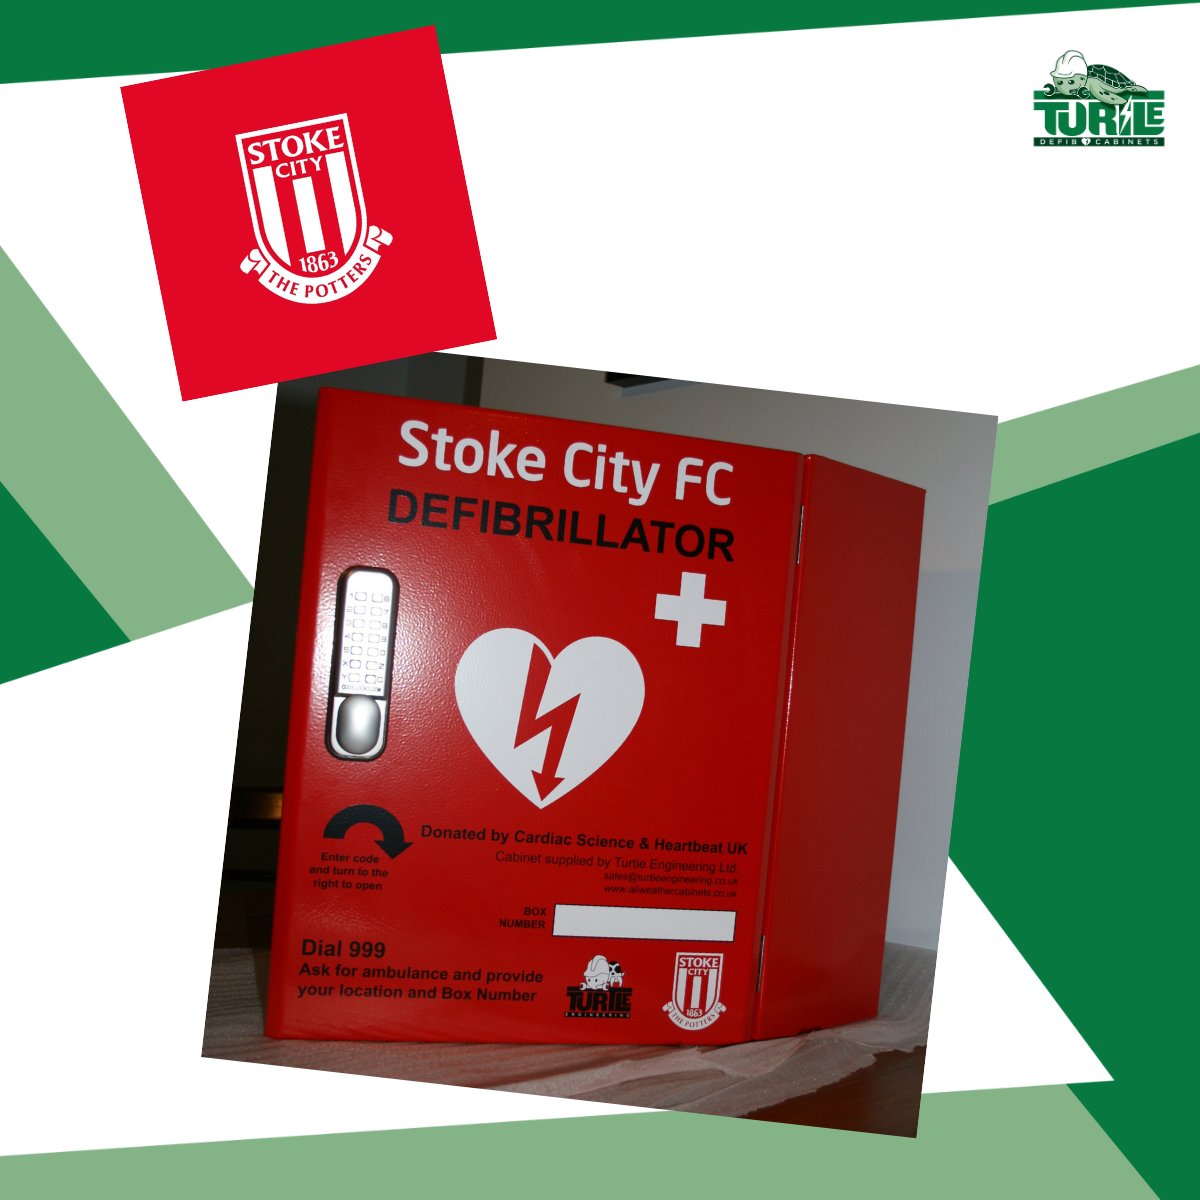 How’s this for #throwbackthursday? The 1st #defibcabinet we designed & built for @stokecity in 2012. Since, we’ve partnered with numerous #sportsclubs - like @surreycricket @Wolves & @Arsenal - & have helped to make their #stadiums safer with #bleedcontrol & #defib cabinets.